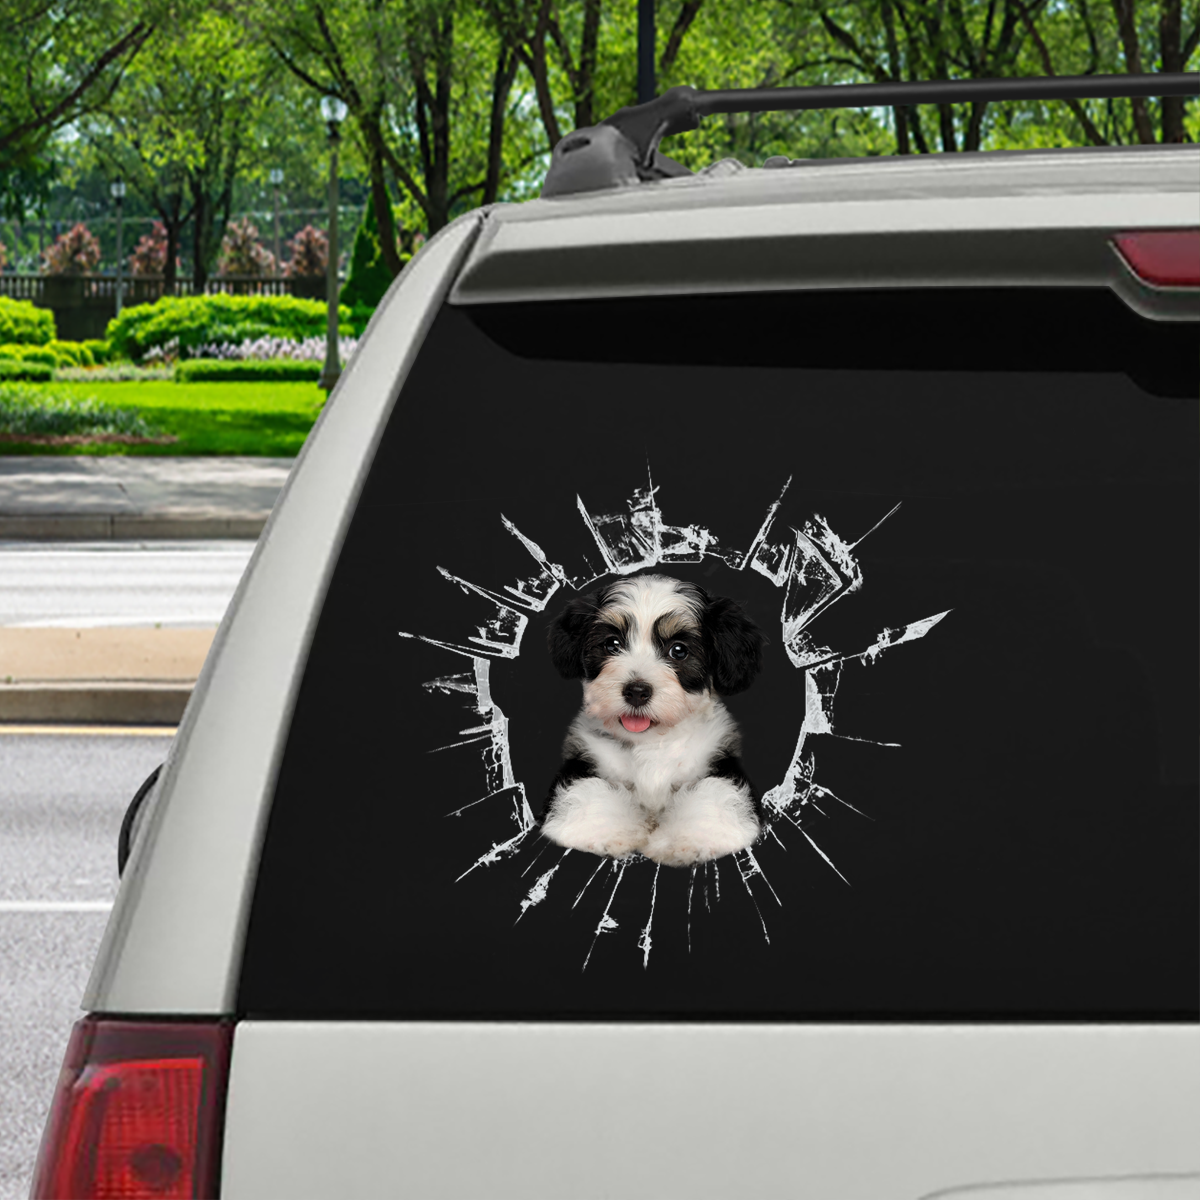 Get In - It's Time For Shopping - Havanese Car Sticker V1